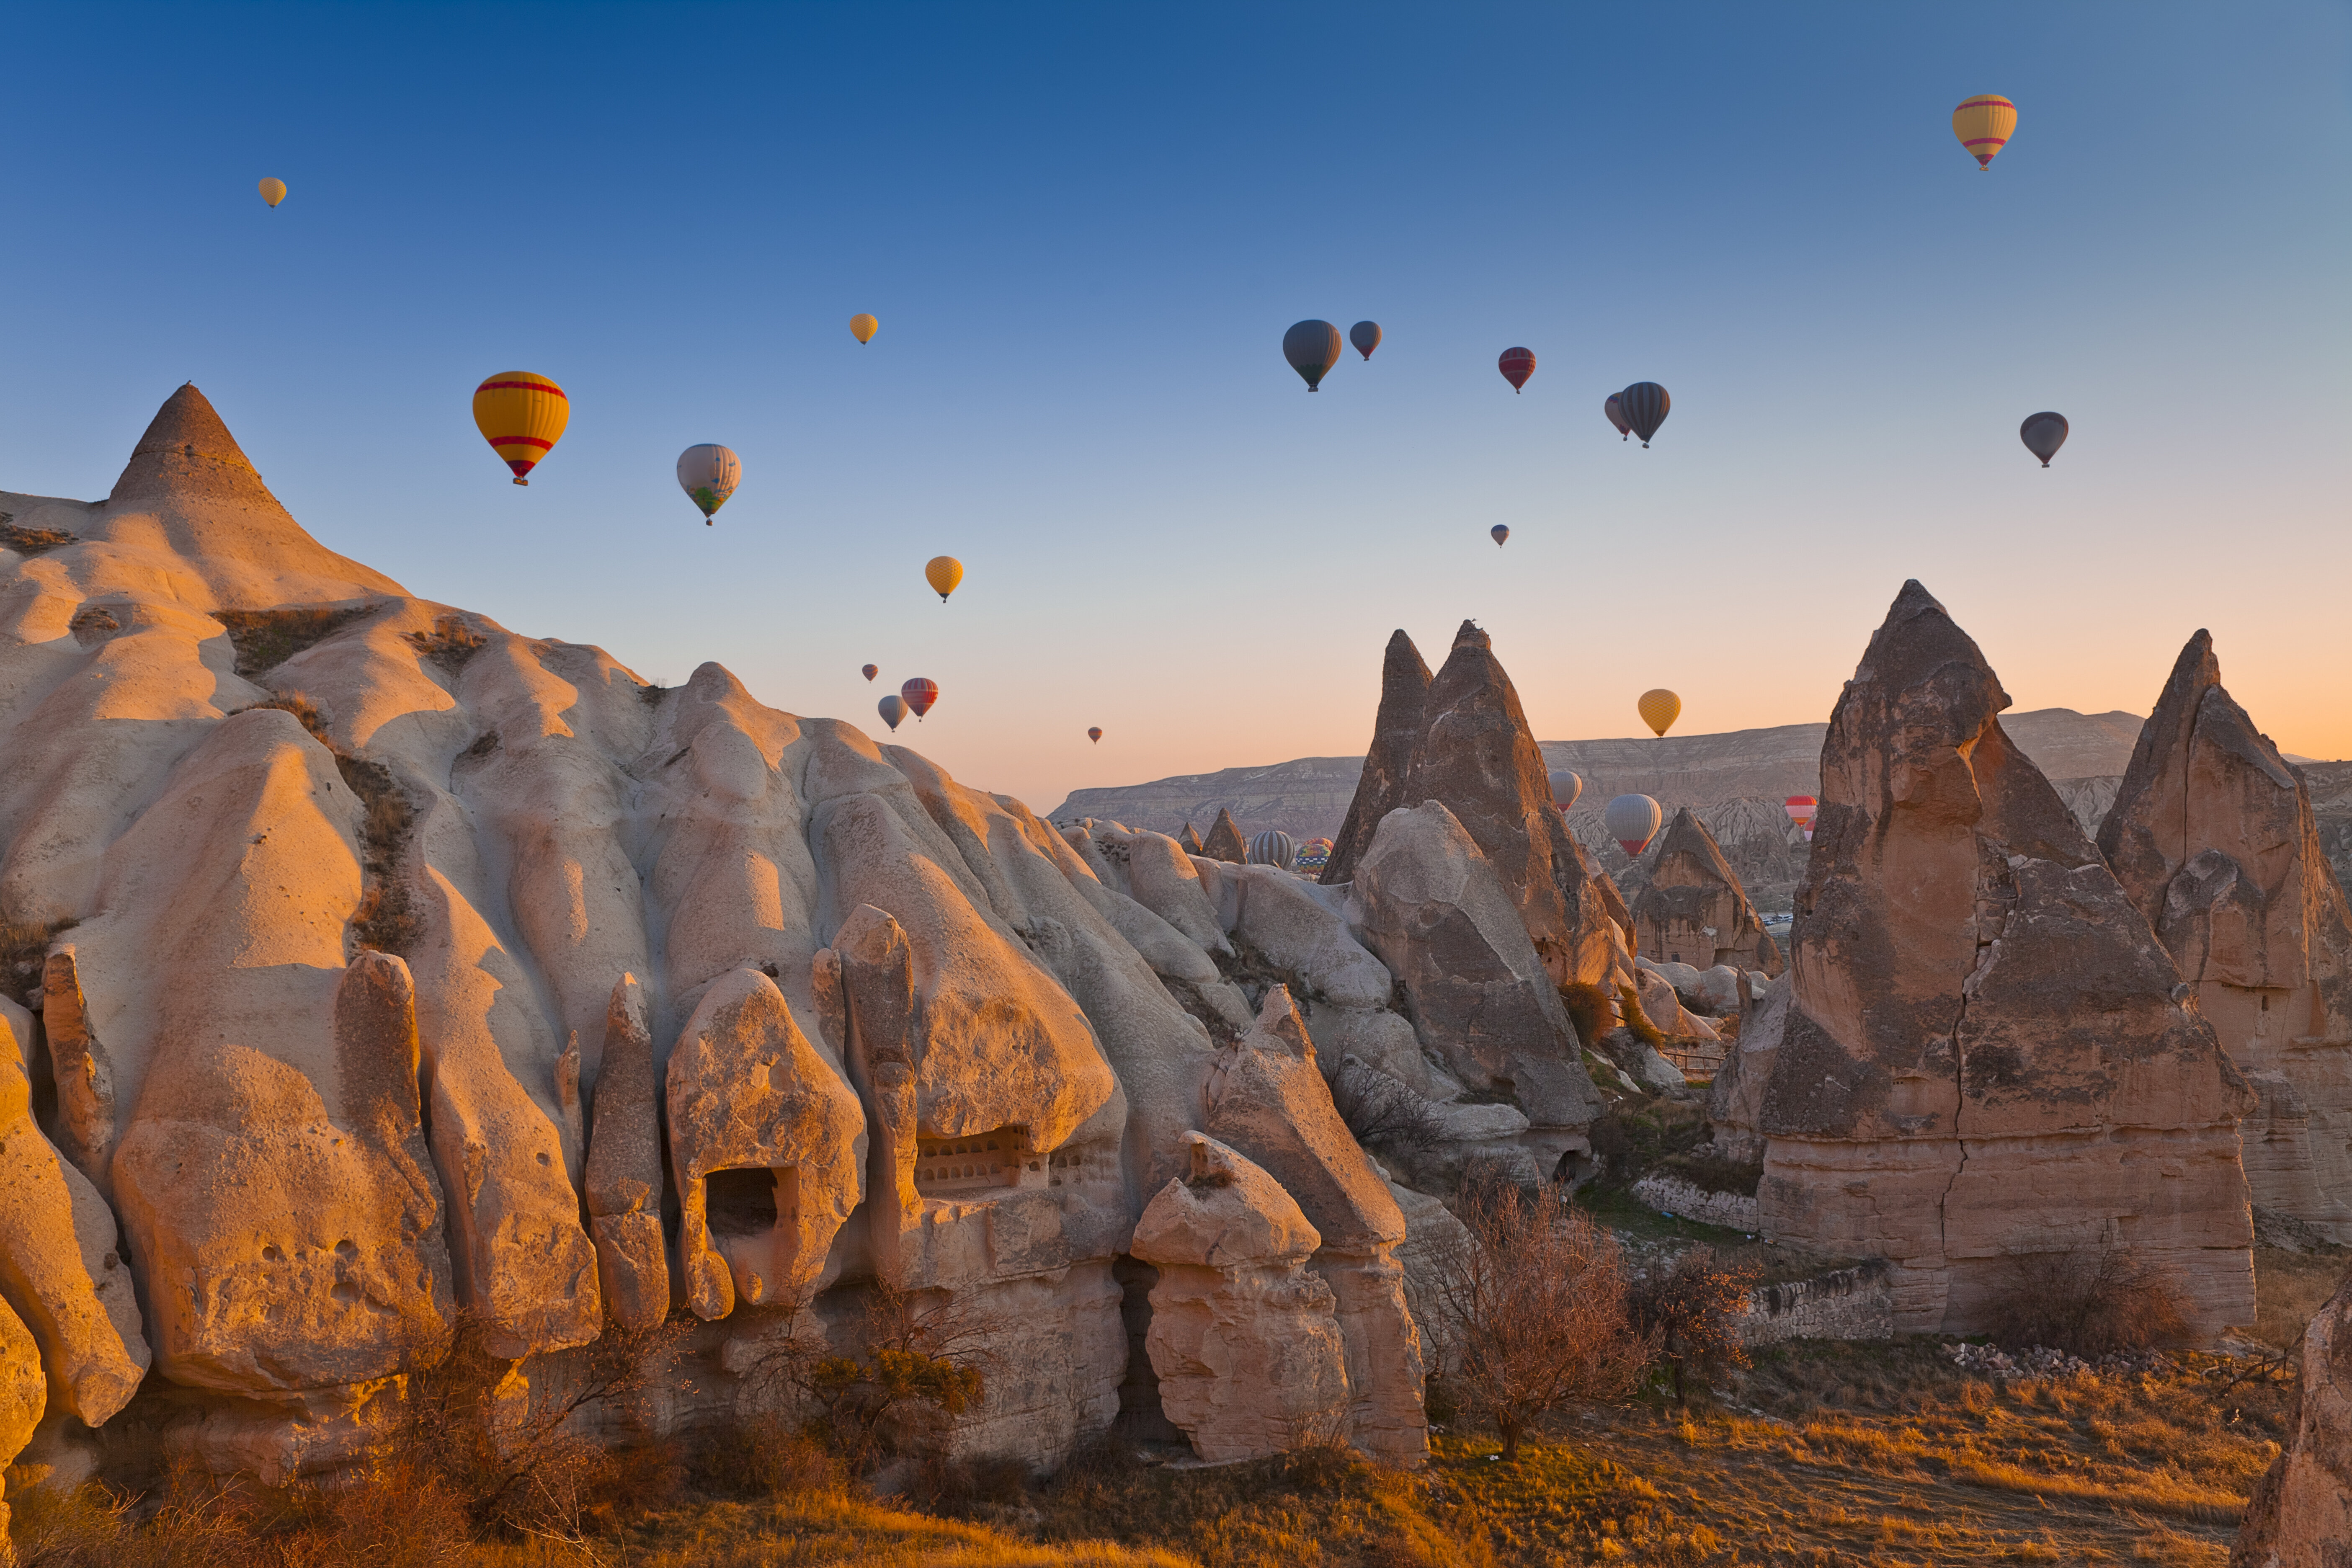 Hot air balloons dotting the sky in Turkey